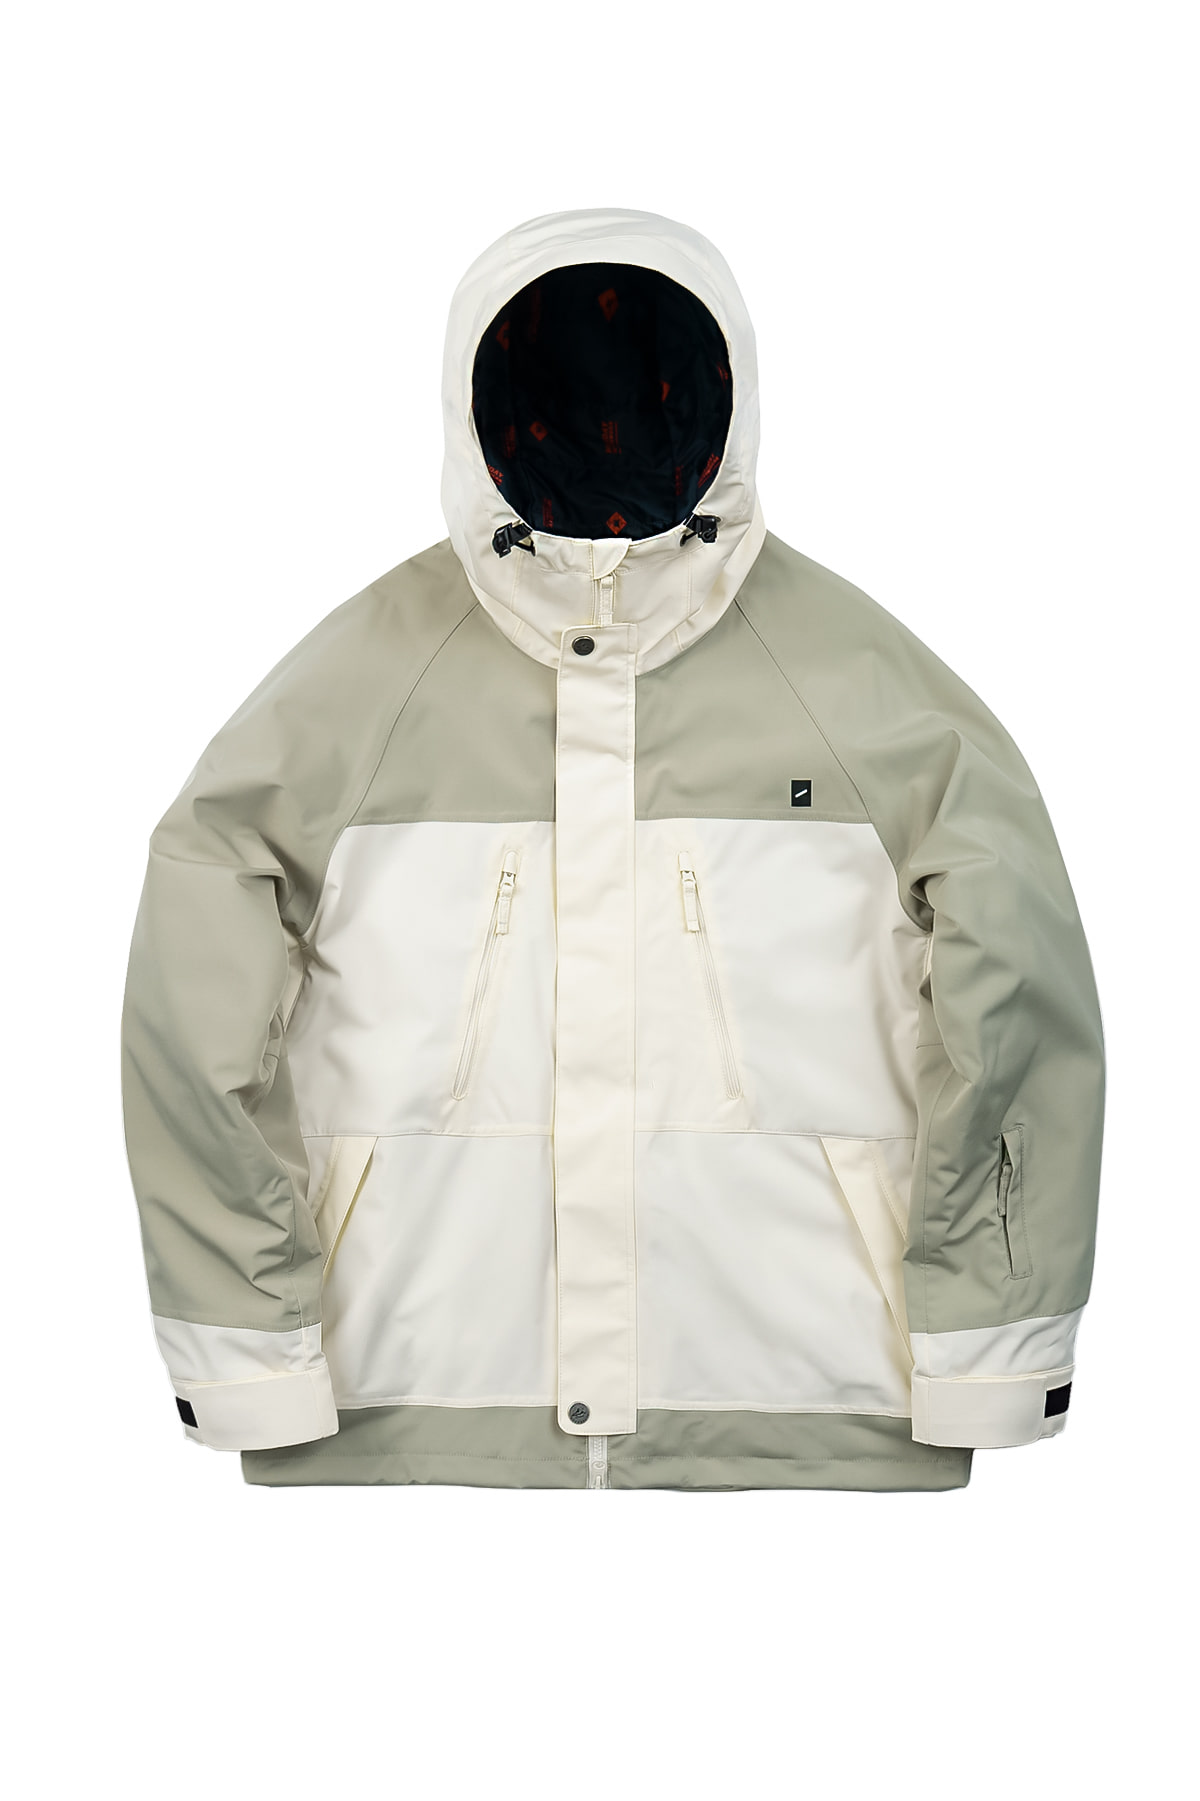 ULTIMA 2L JACKET[2layer]-BUTTER CREAMHOLIDAY OUTERWEAR